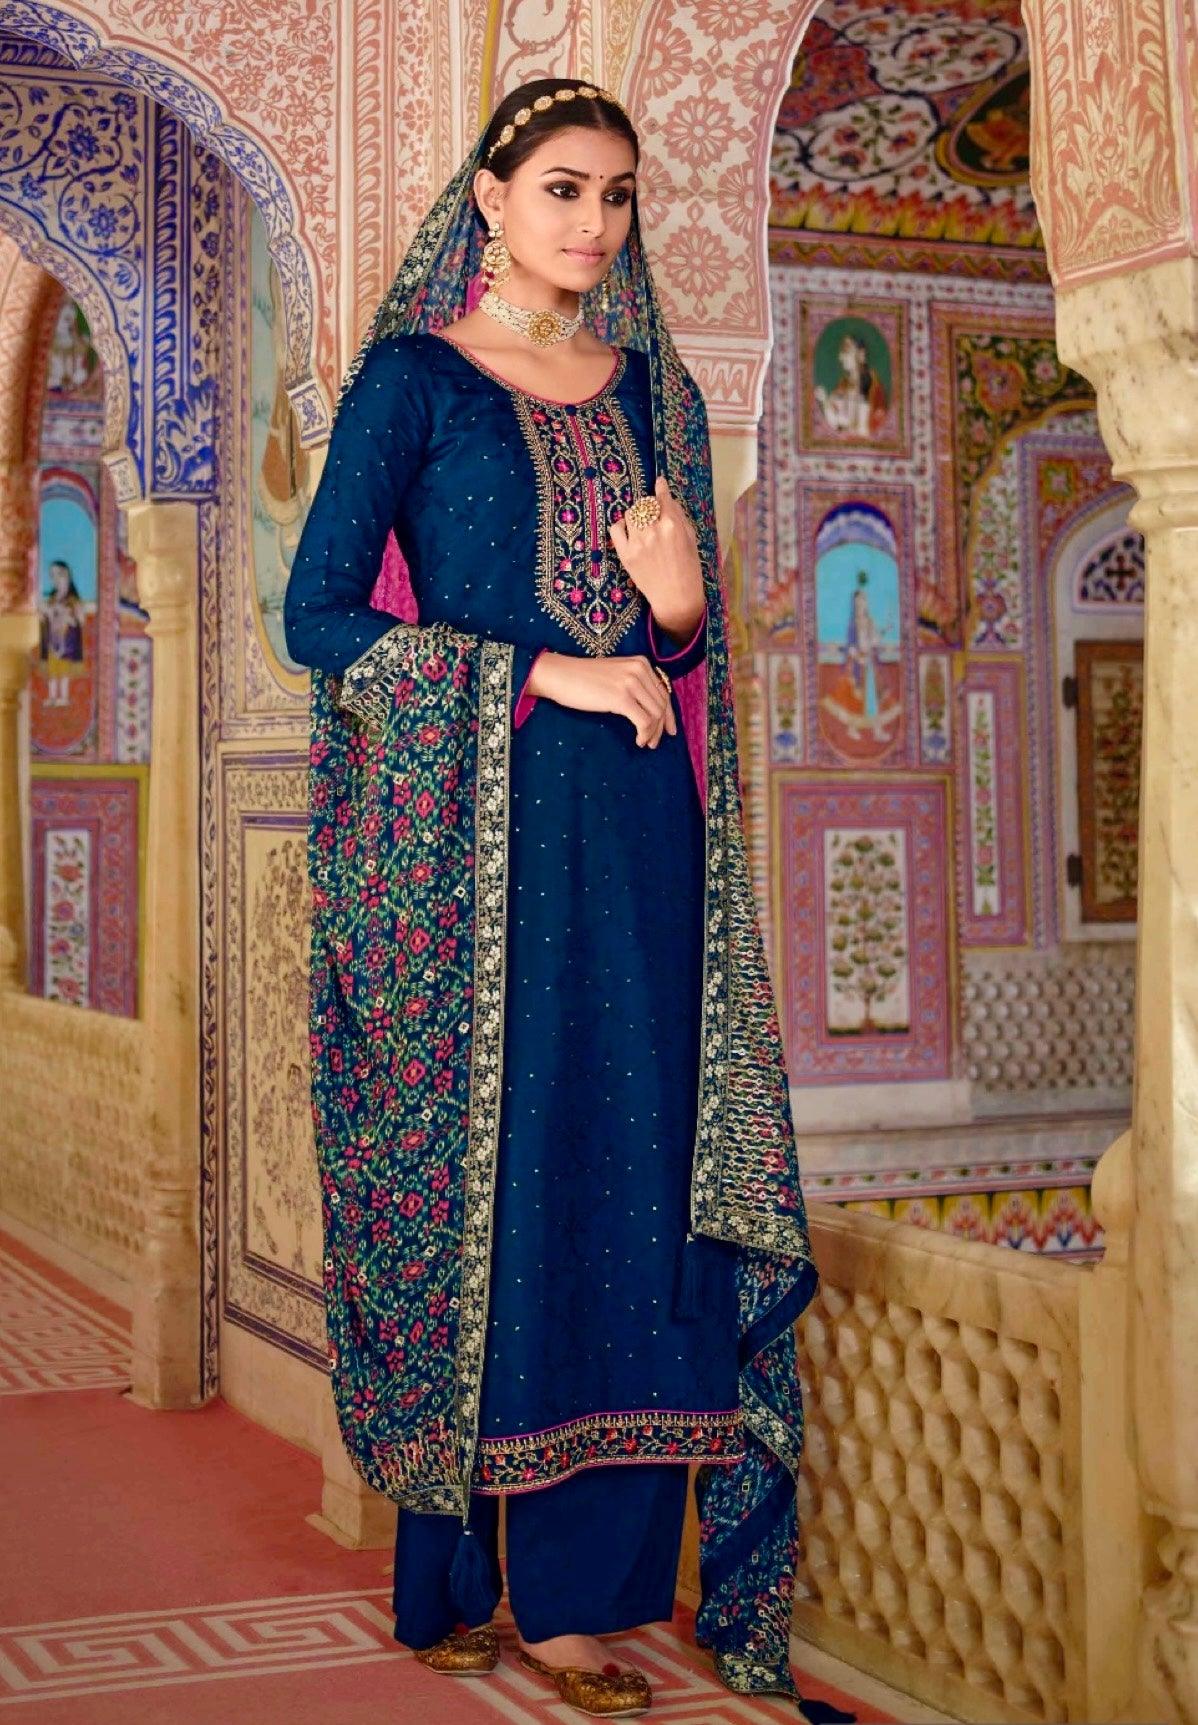 Women’s Round Neck Indian Dola Silk with embroidery sequins works dress, Party wear Salwar kamiz suit dress with Dupatta, M L - Diana's Fashion Factory